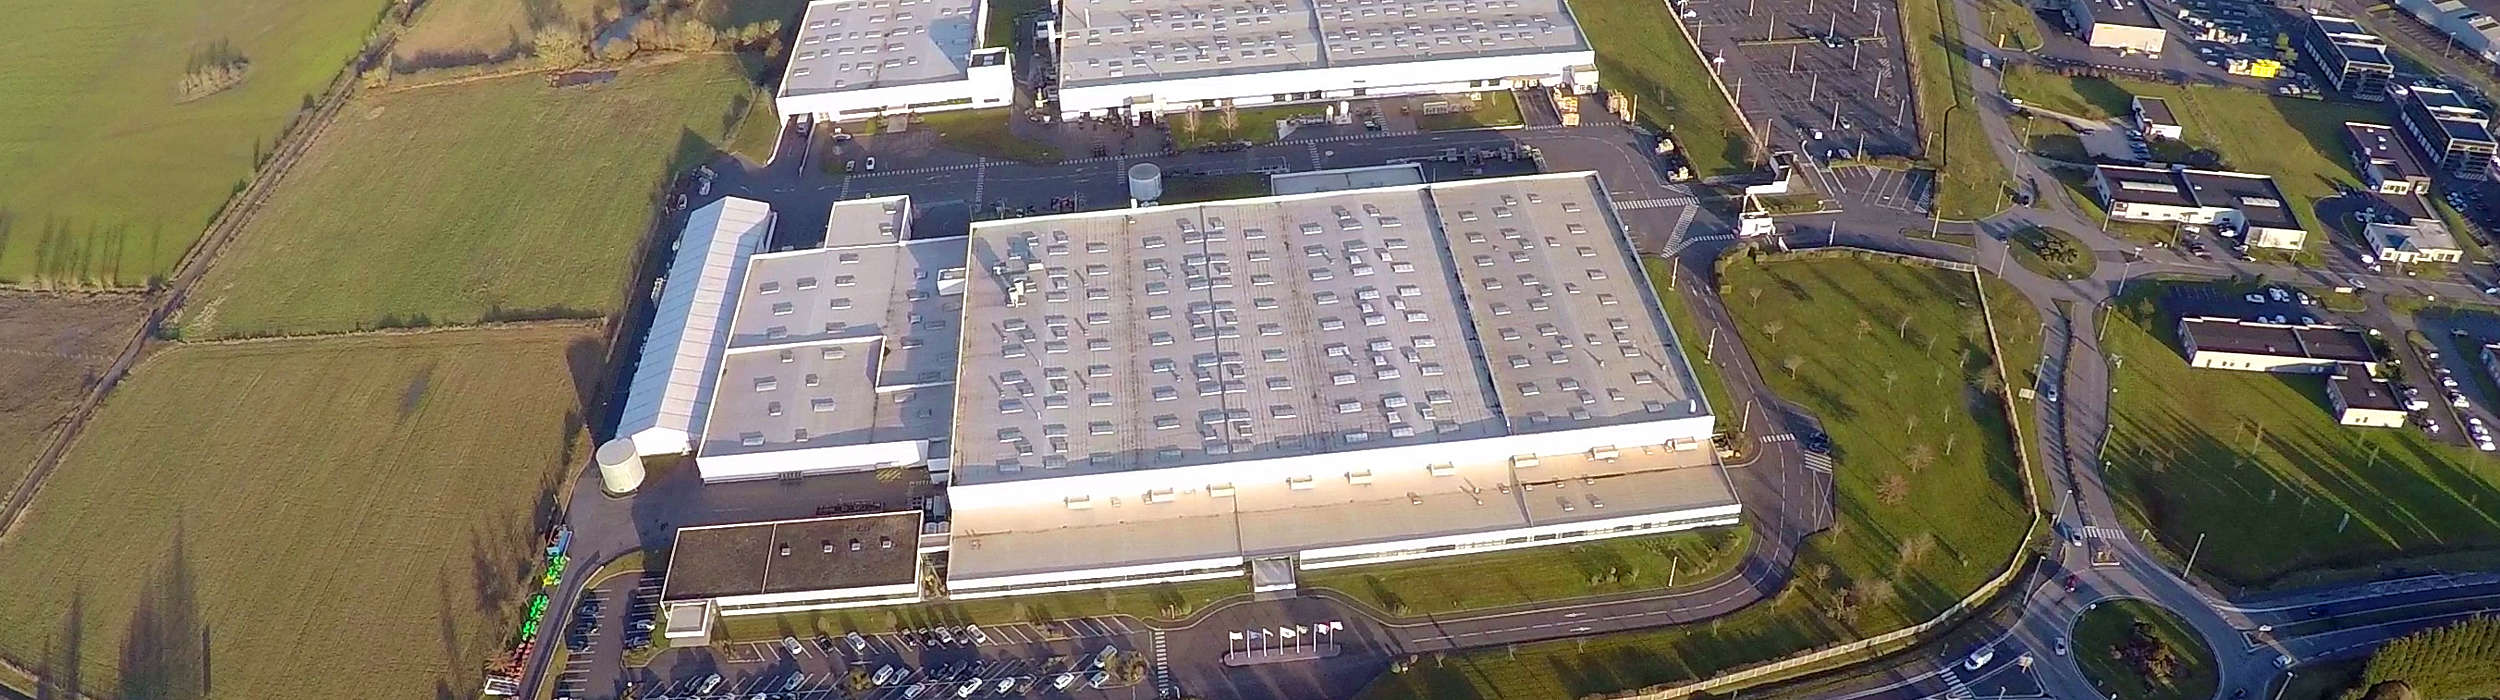 Ancenis factory from above